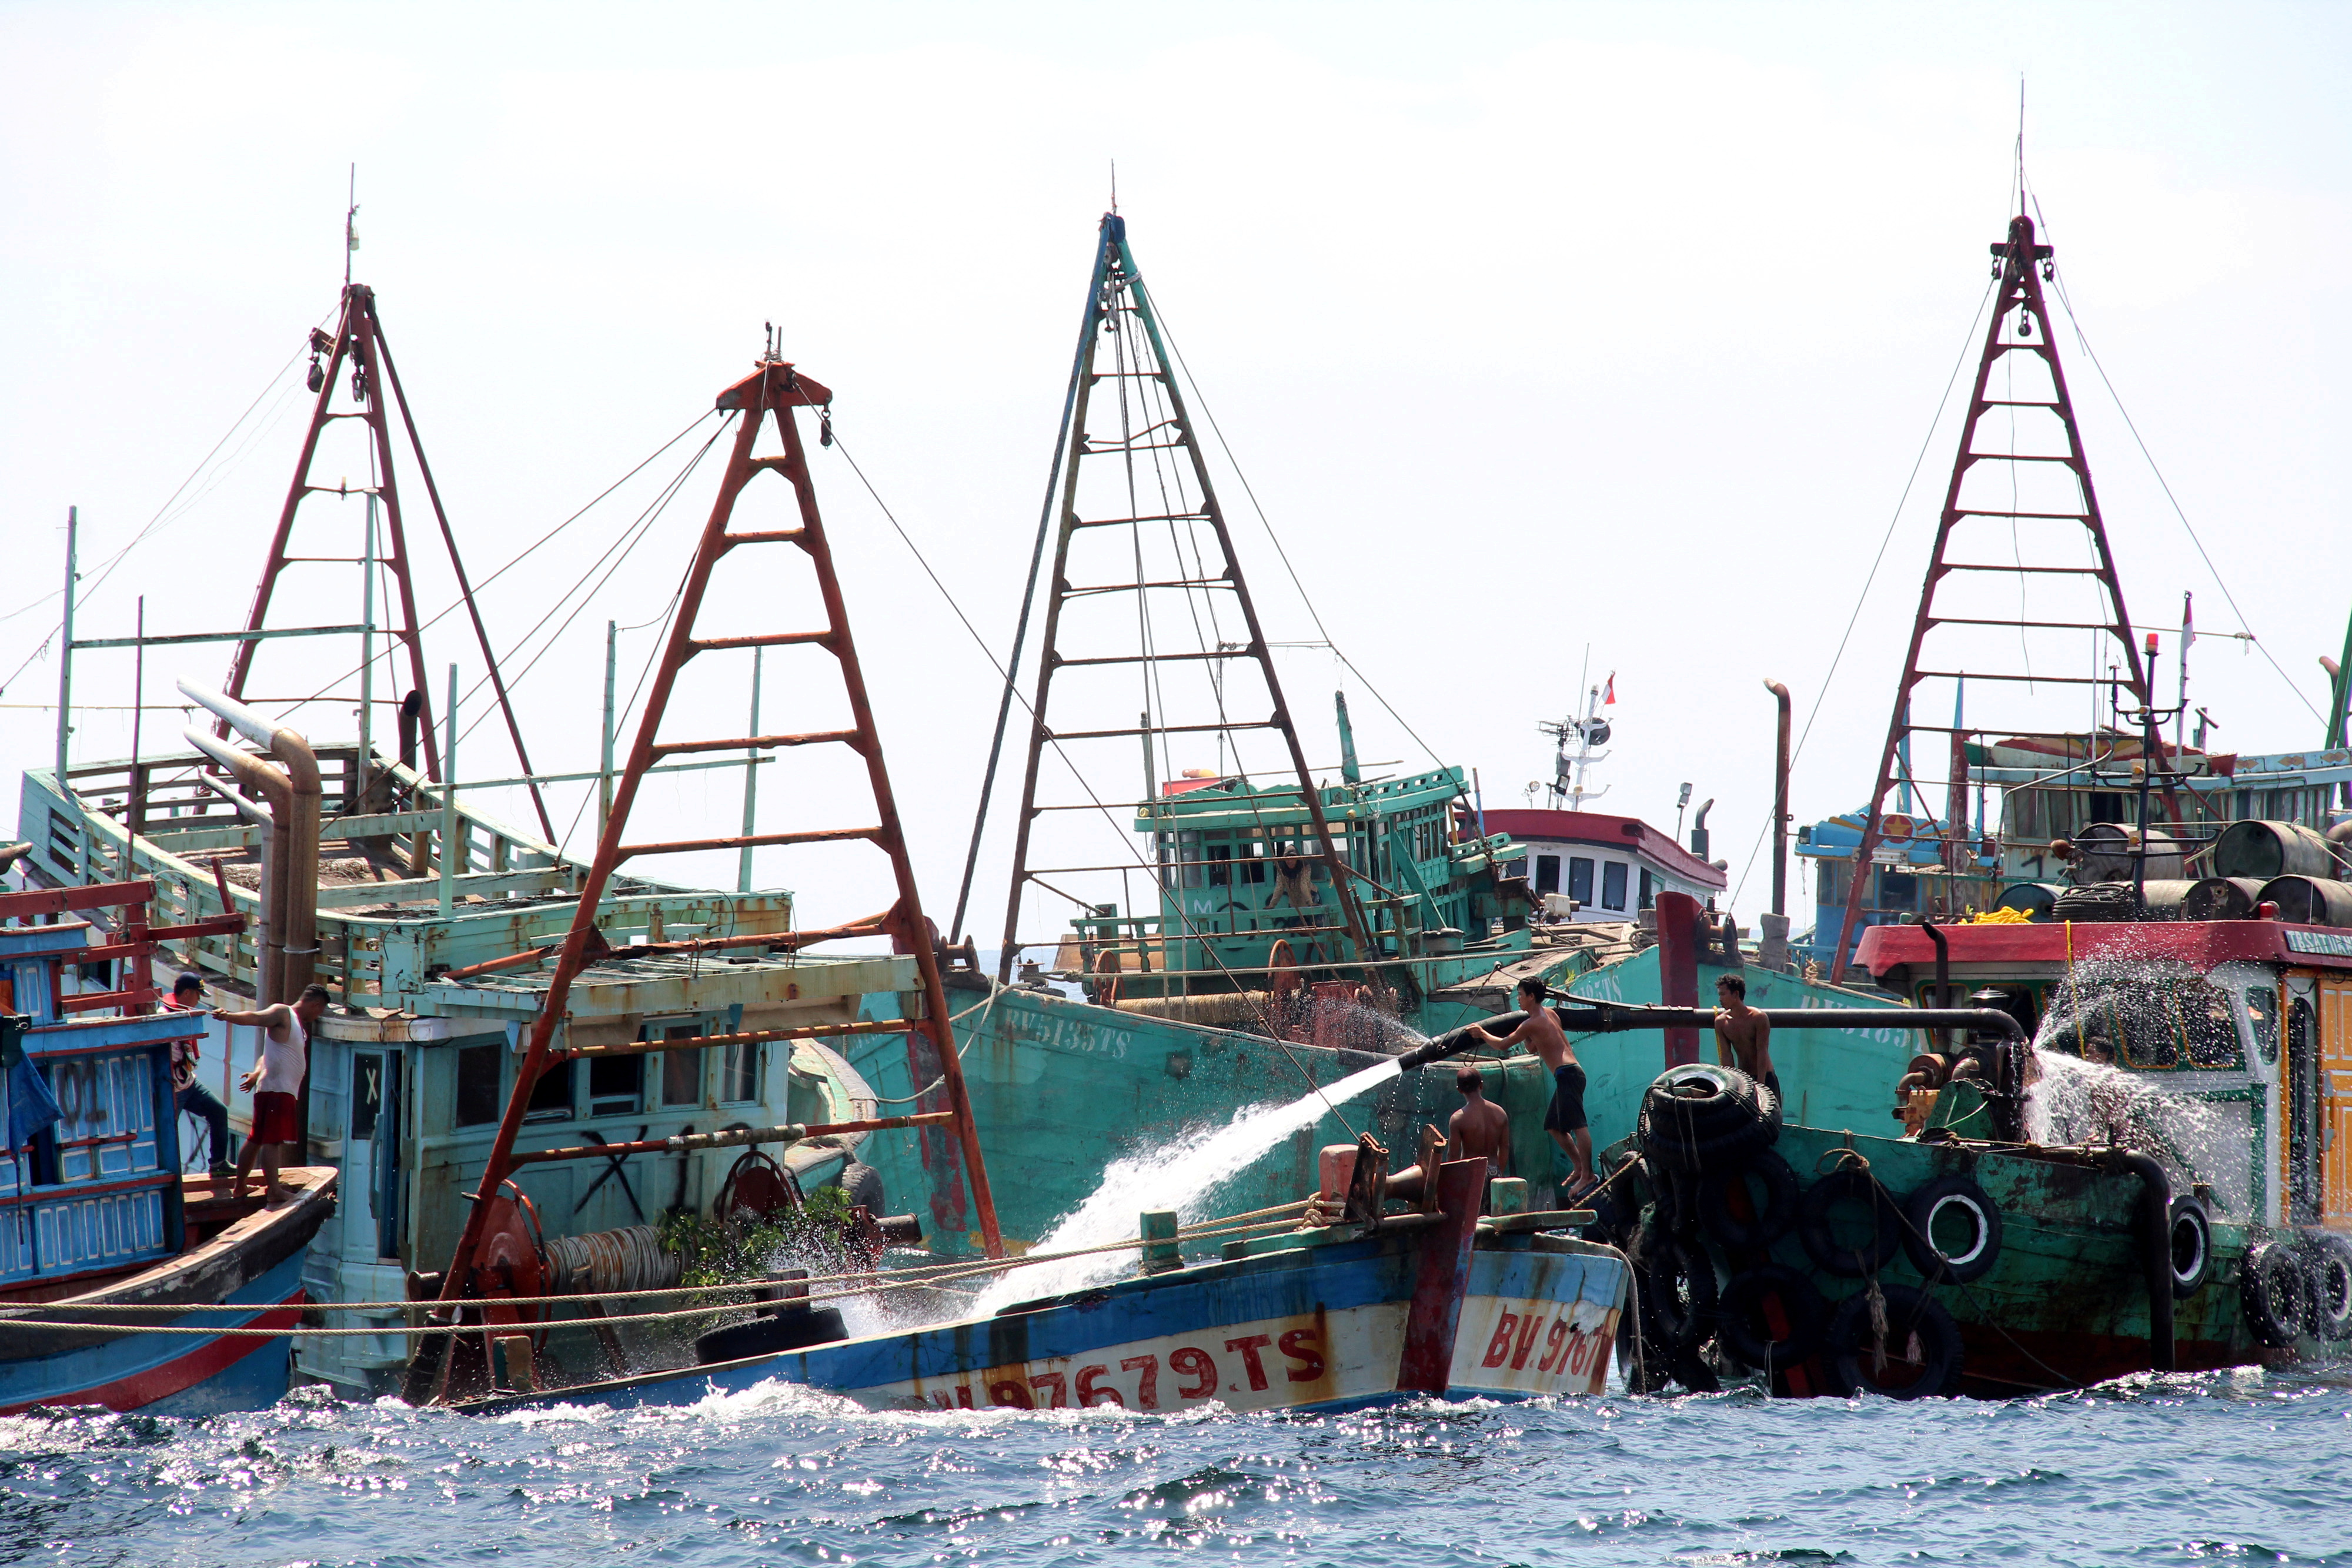 Workers fill Vietnamese fishing boats with water to sink them after they were seized due to illegal fishing in Indonesia's waters, at Datuk island in West Kalimantan